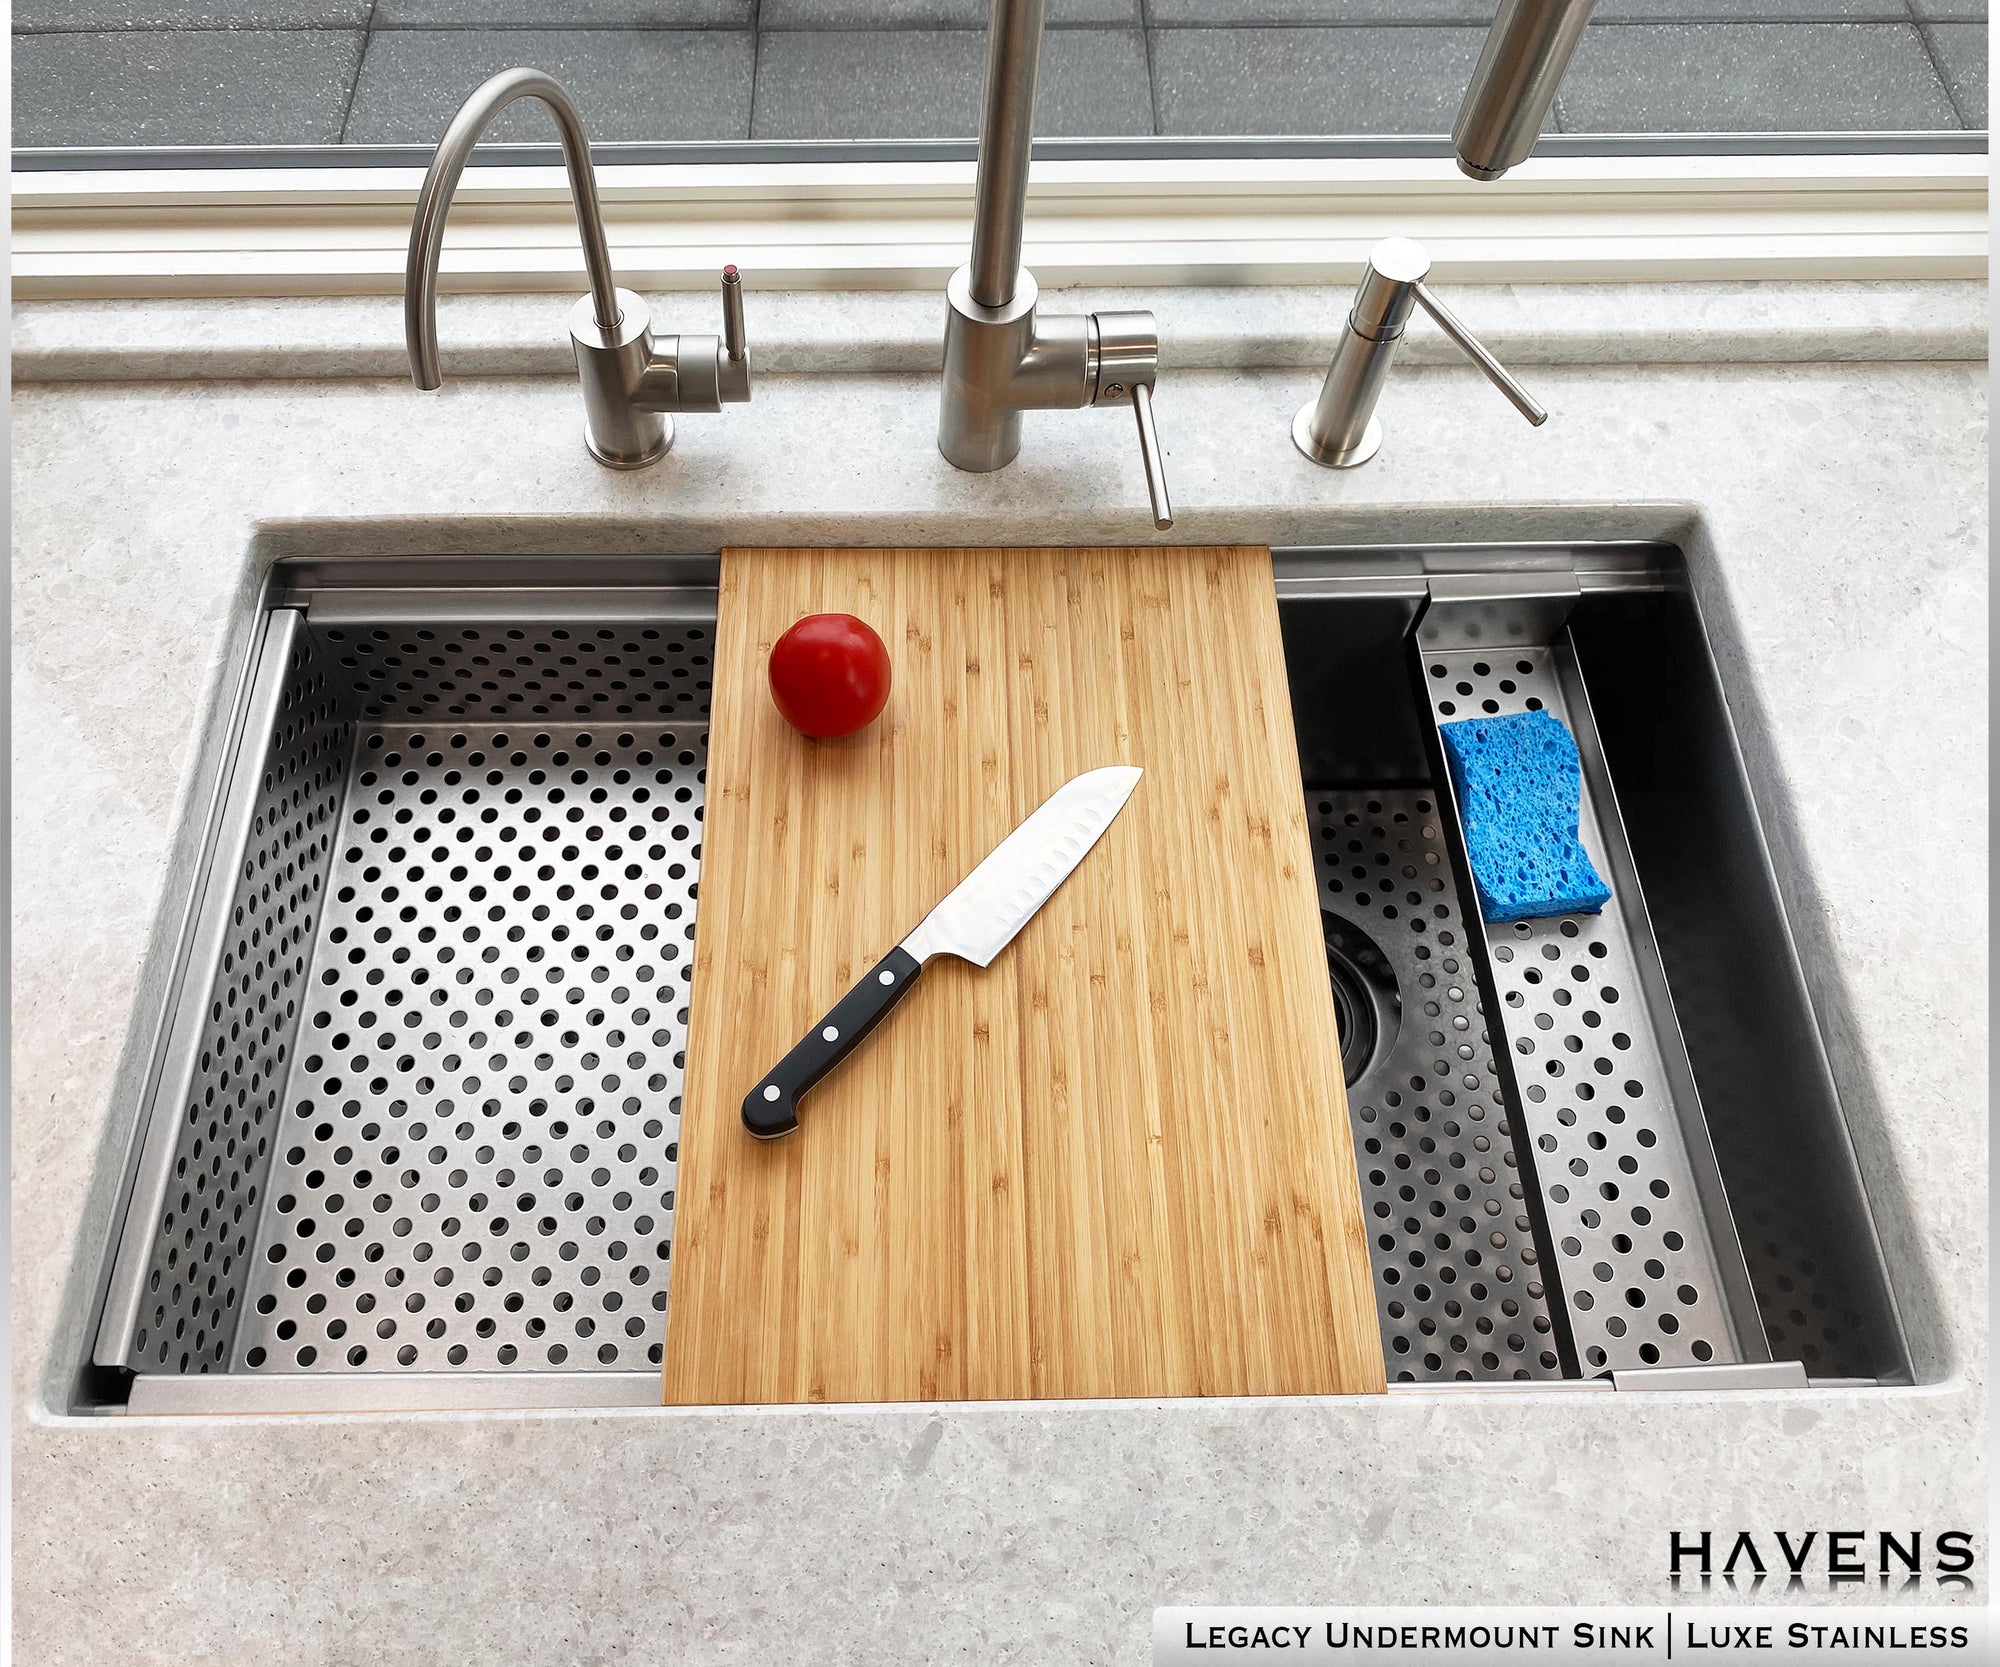 Accessory - Advanced Sponge Caddy, Pro Cutting Board, and Drop-In Strainer shown in Stainless Steel 